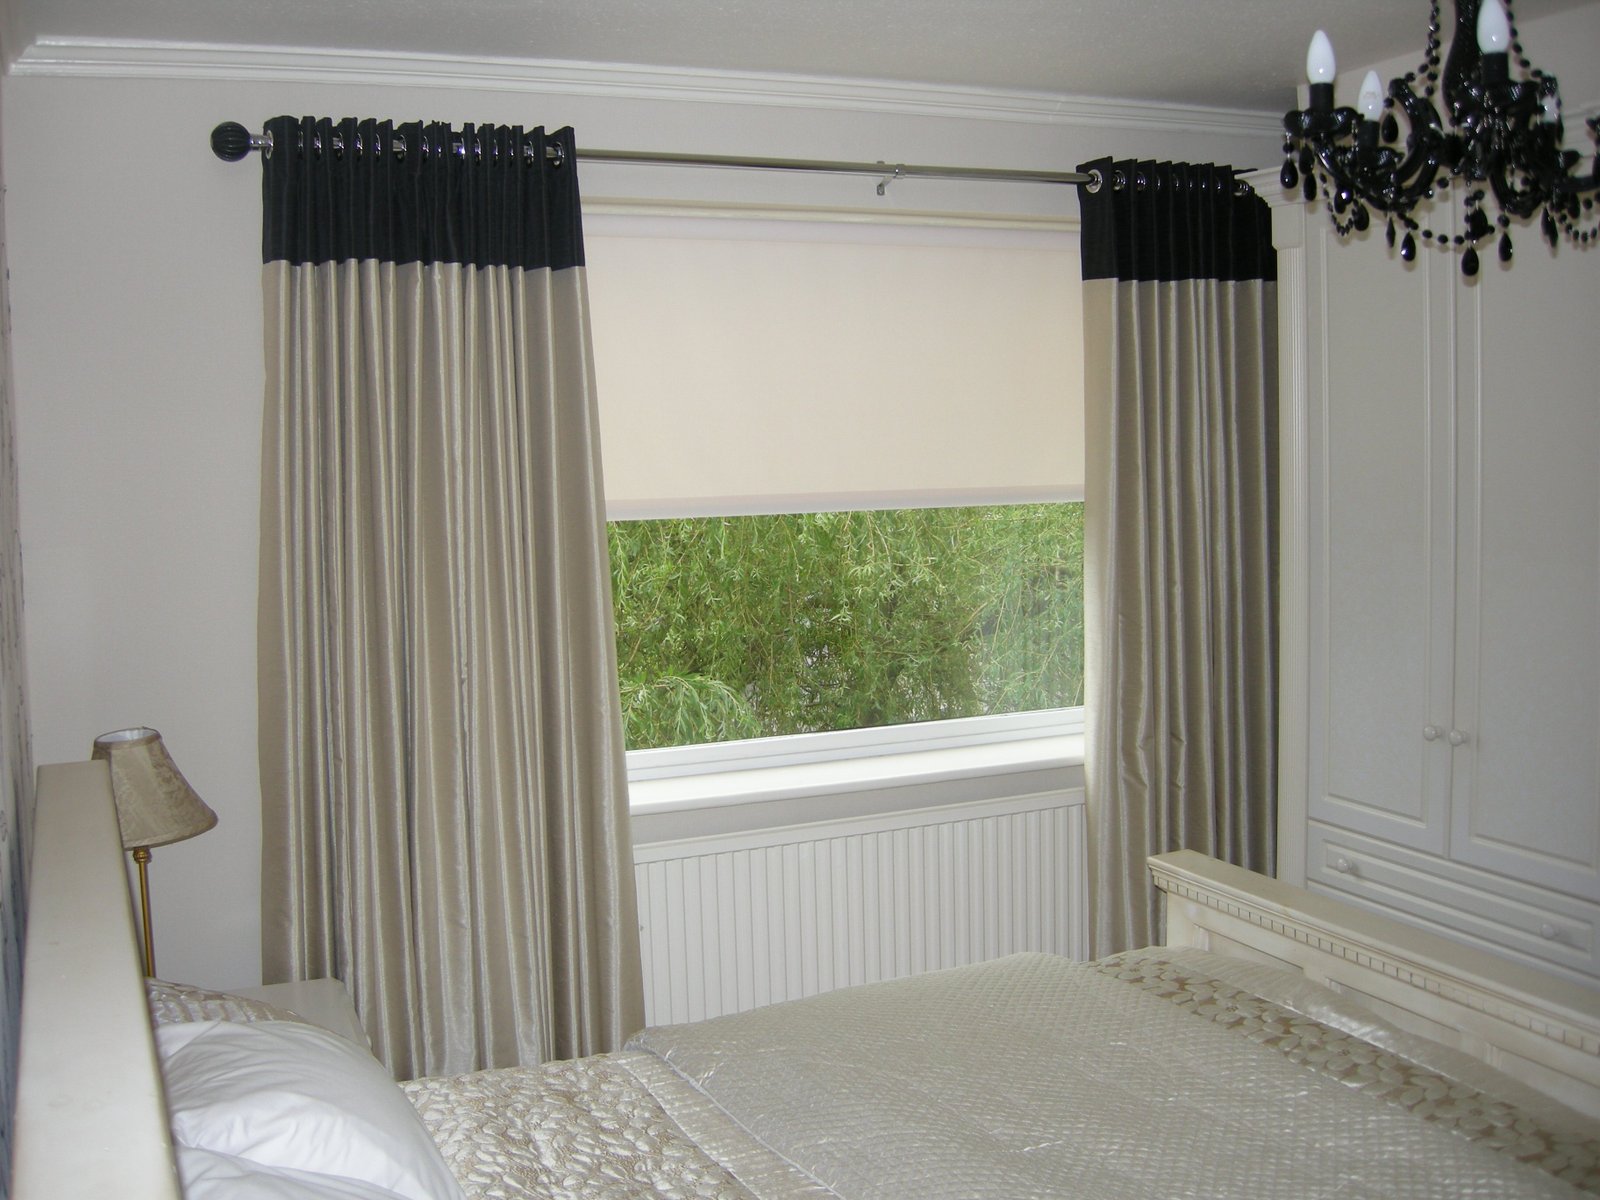 blinds-and-drapes-and-pull-the-curtains-and-blinds-blinds-shades-curtains